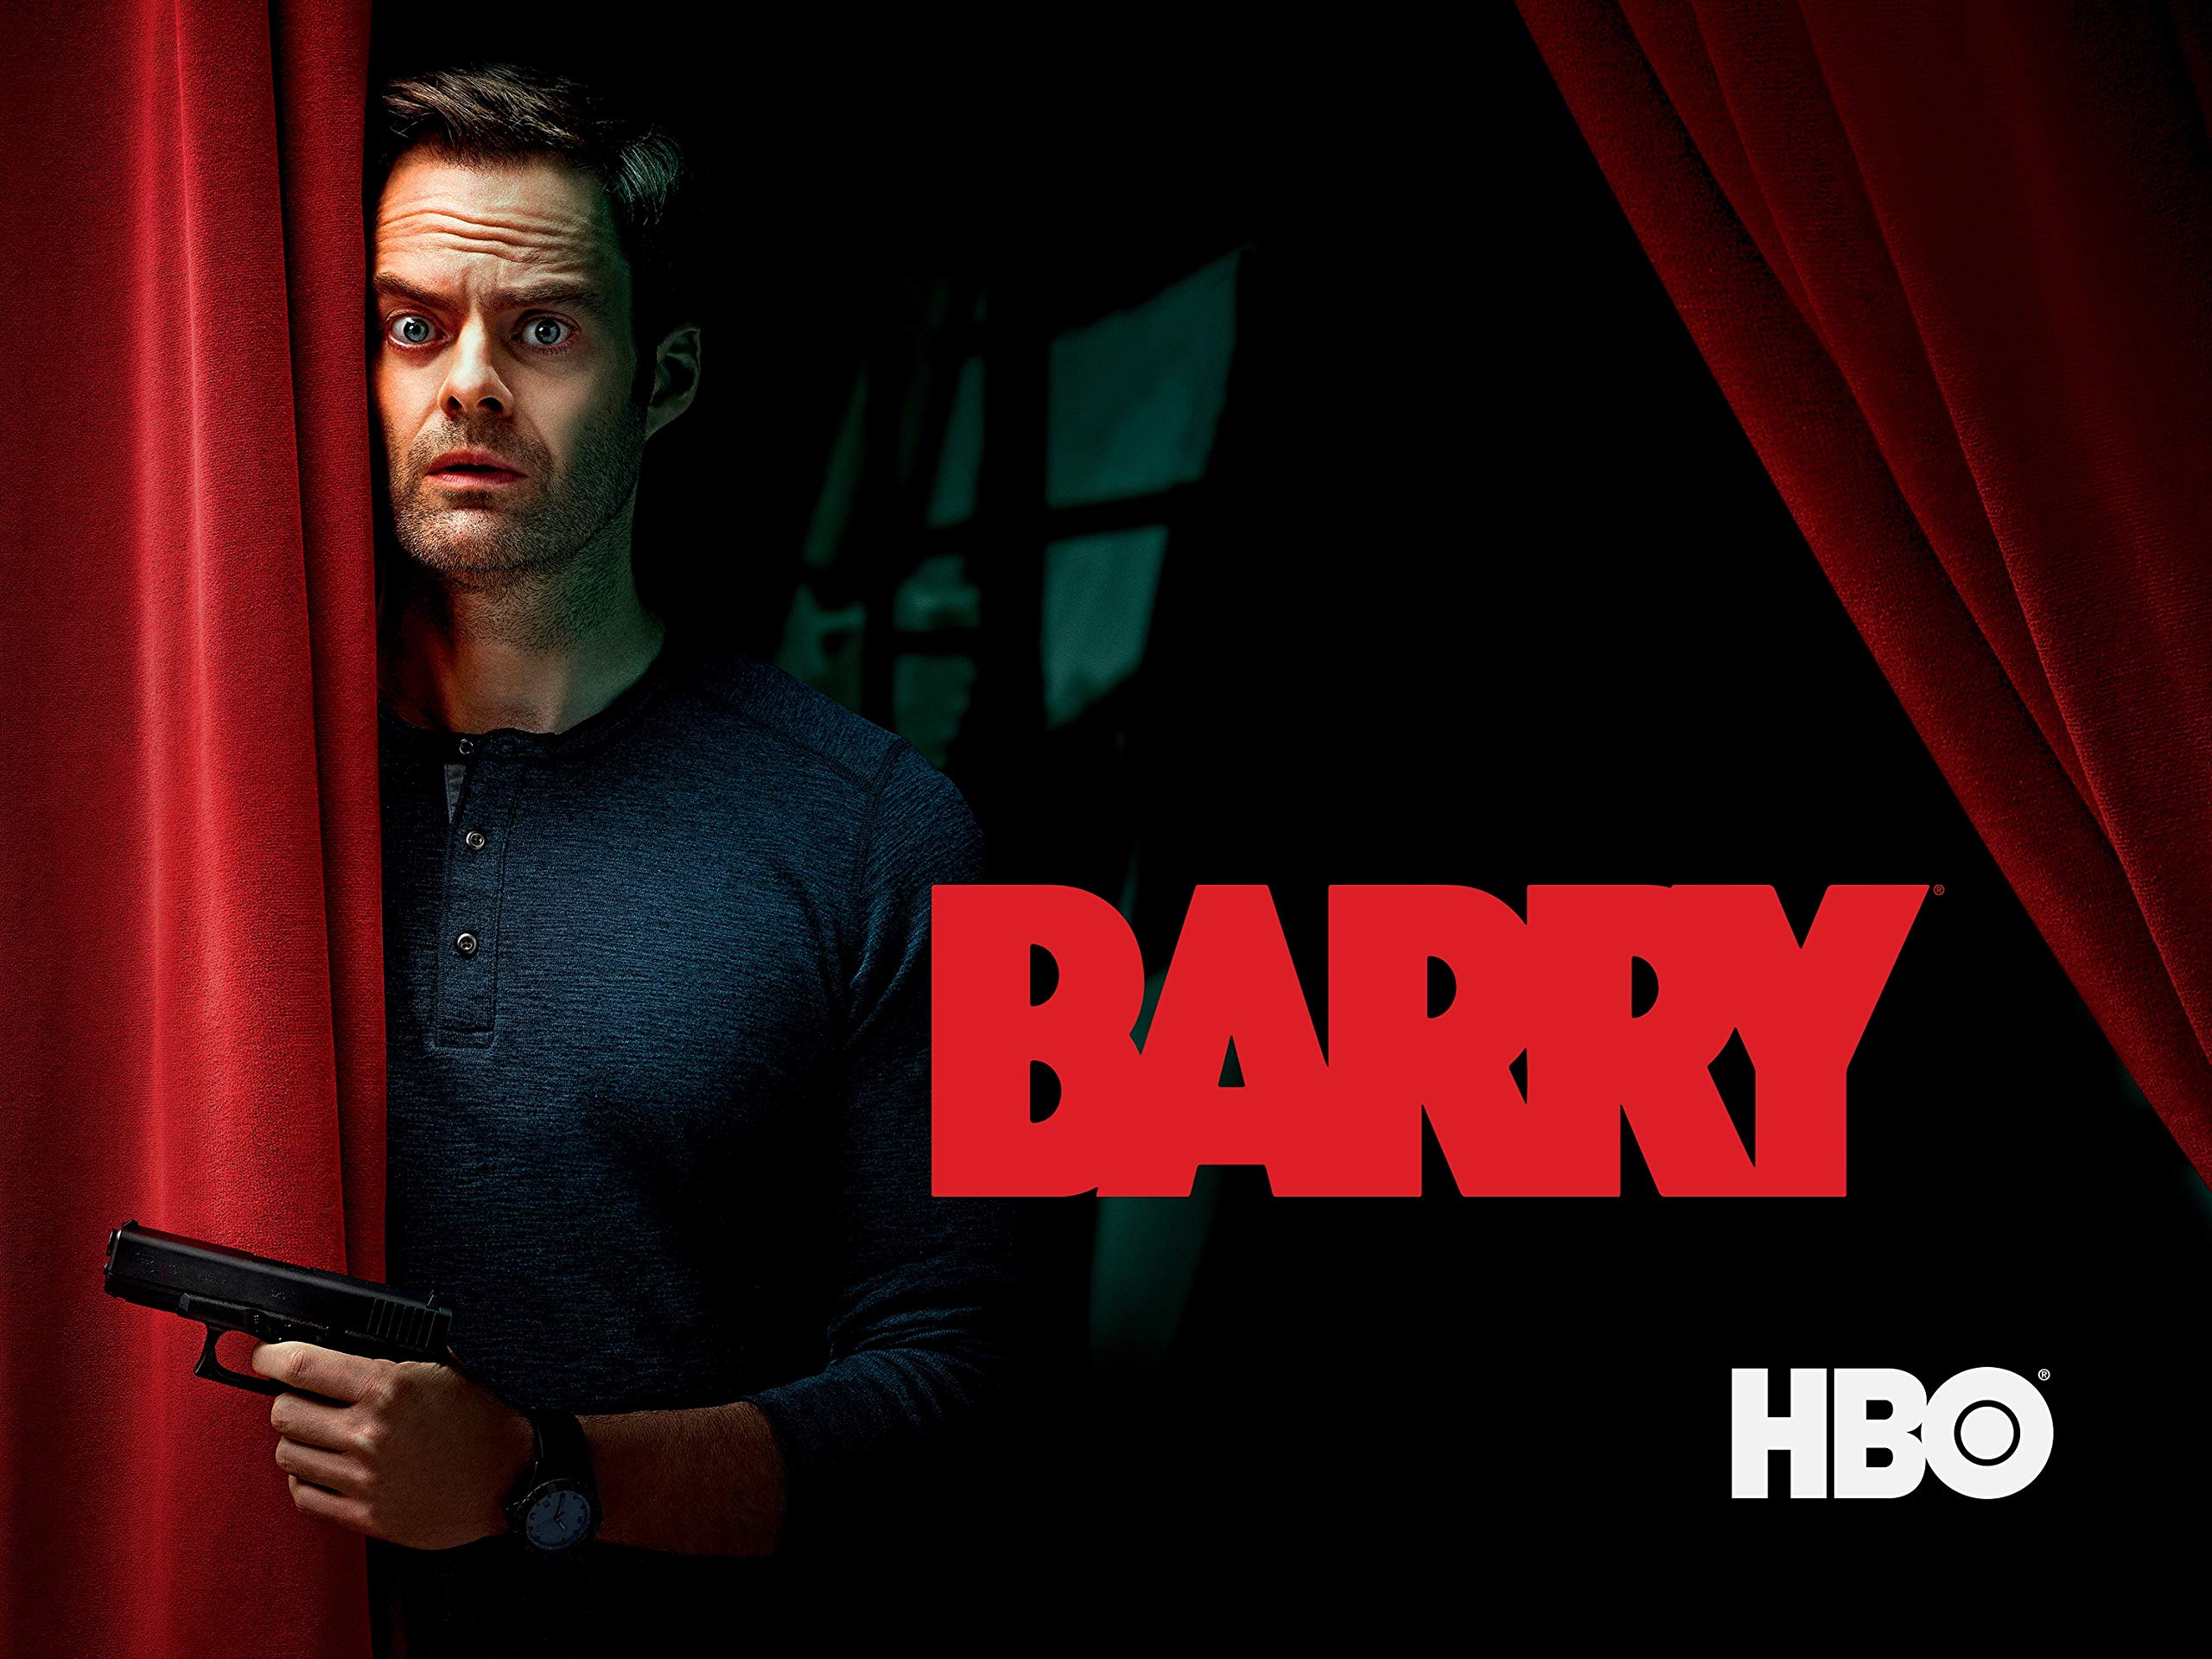 Putting a spotlight on HBO’s Barry!